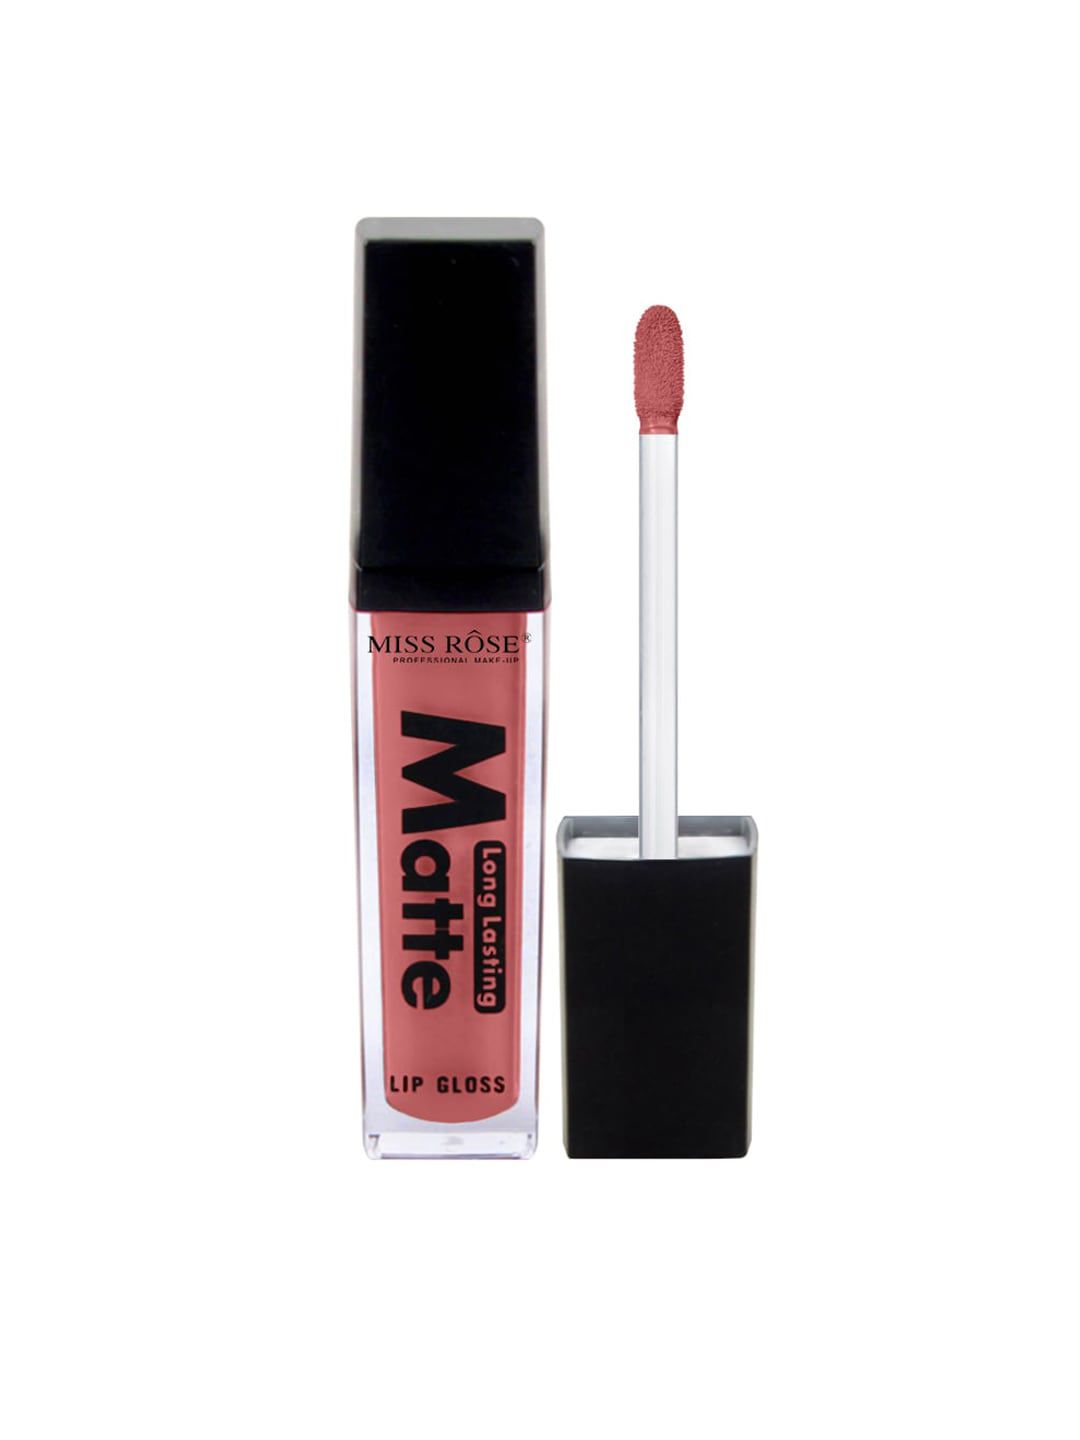 MISS ROSE Matte Long Lasting LipGloss 7701-002M 11 20 gm Price in India